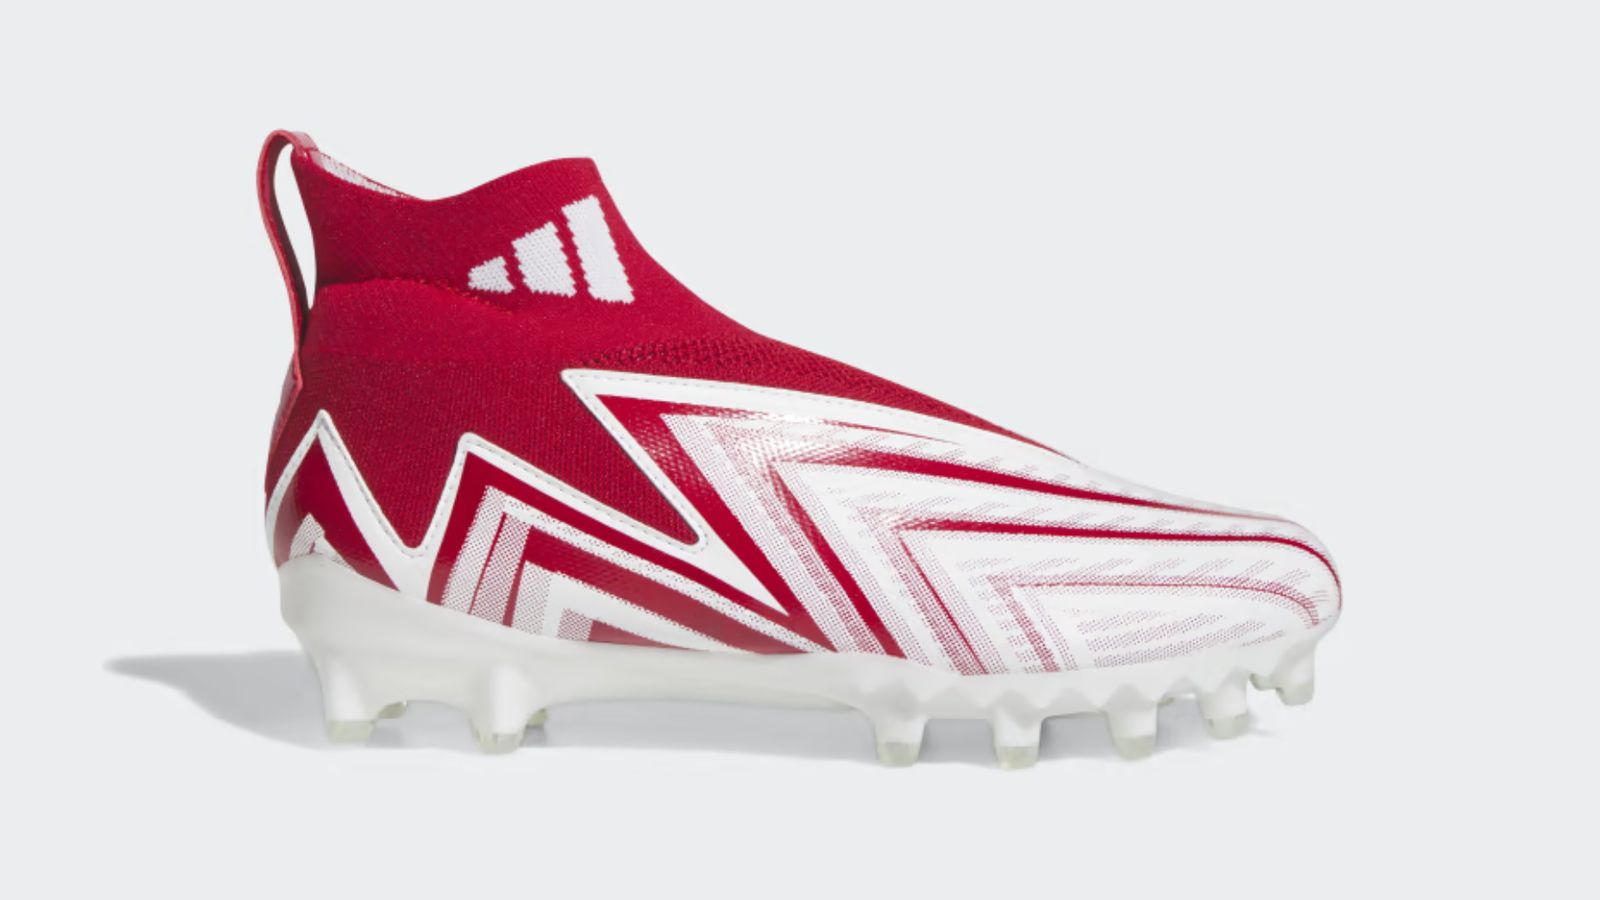 adidas Freak Ultra 23 product image of a white and red laceless, knitted football cleat.